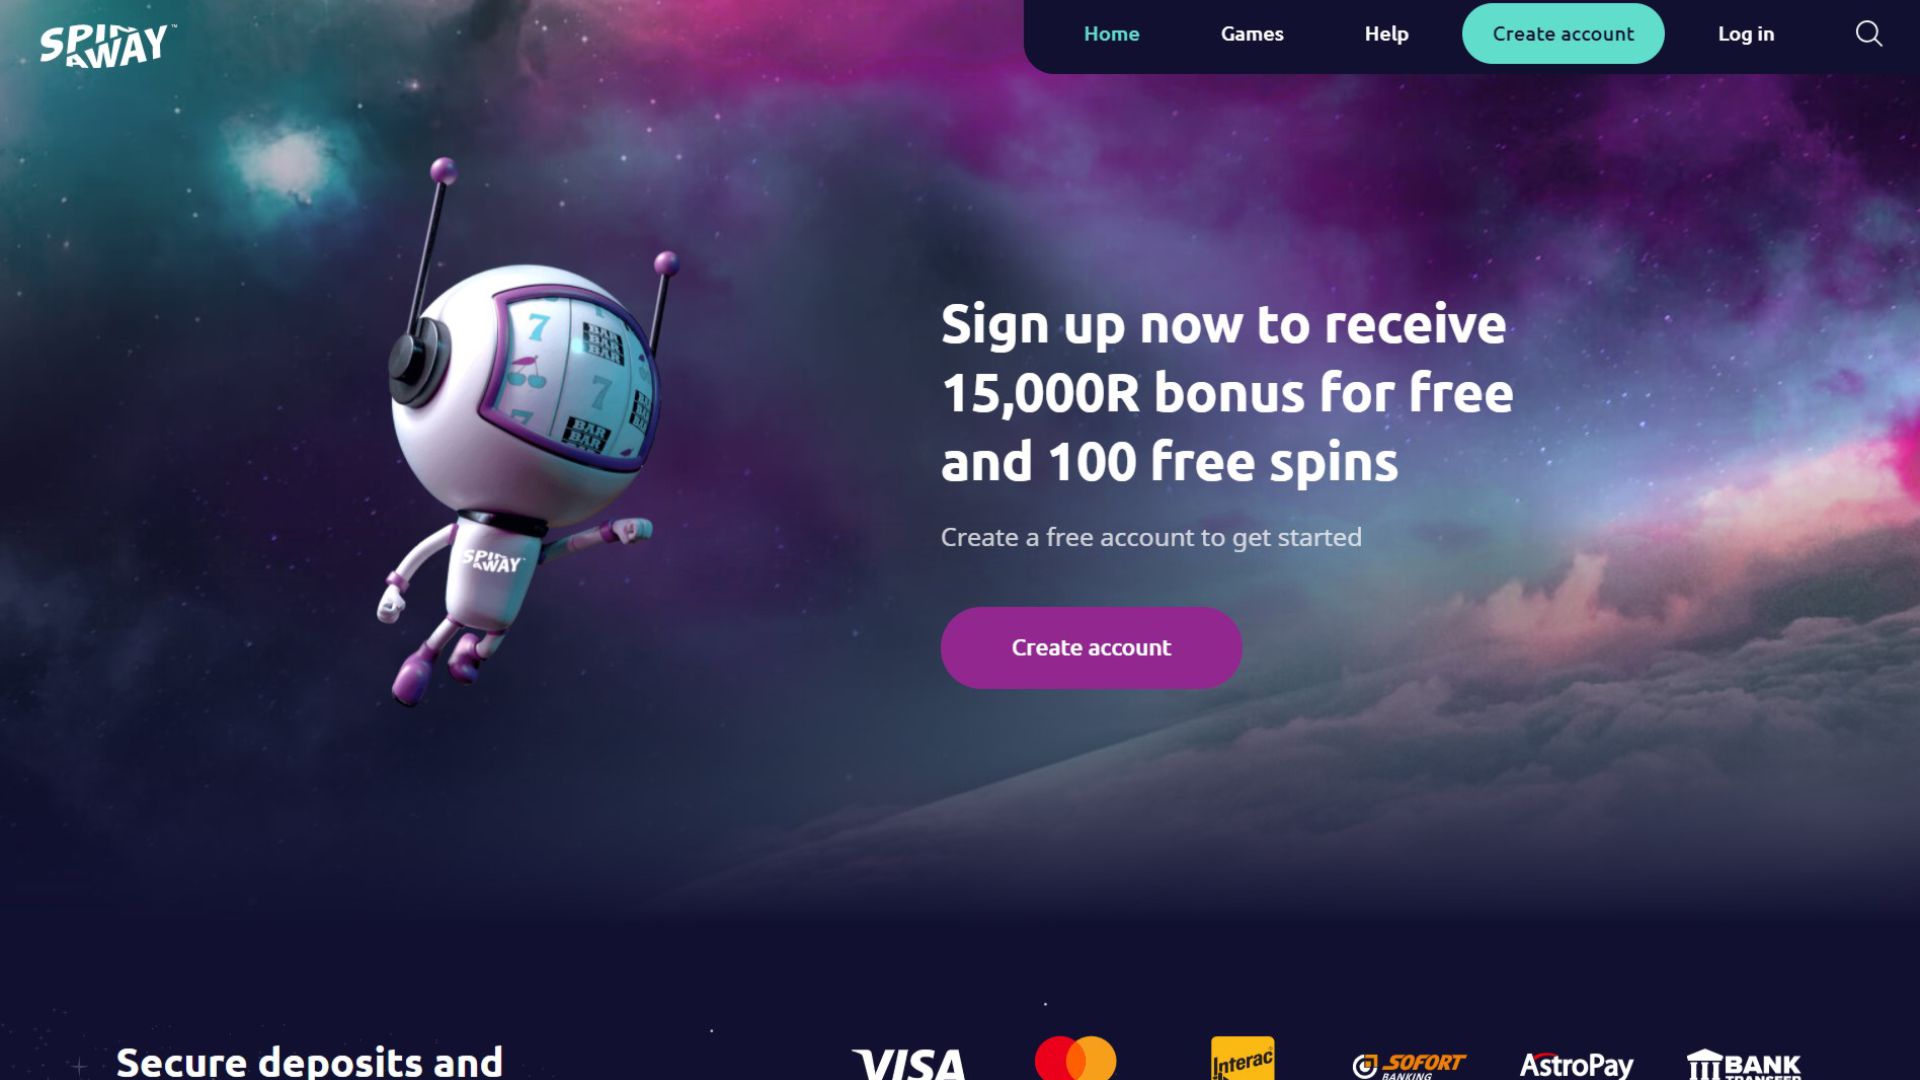 Spinaway Gambling enterprise a modern, new online casino that have a huge possibility of obtaining finest